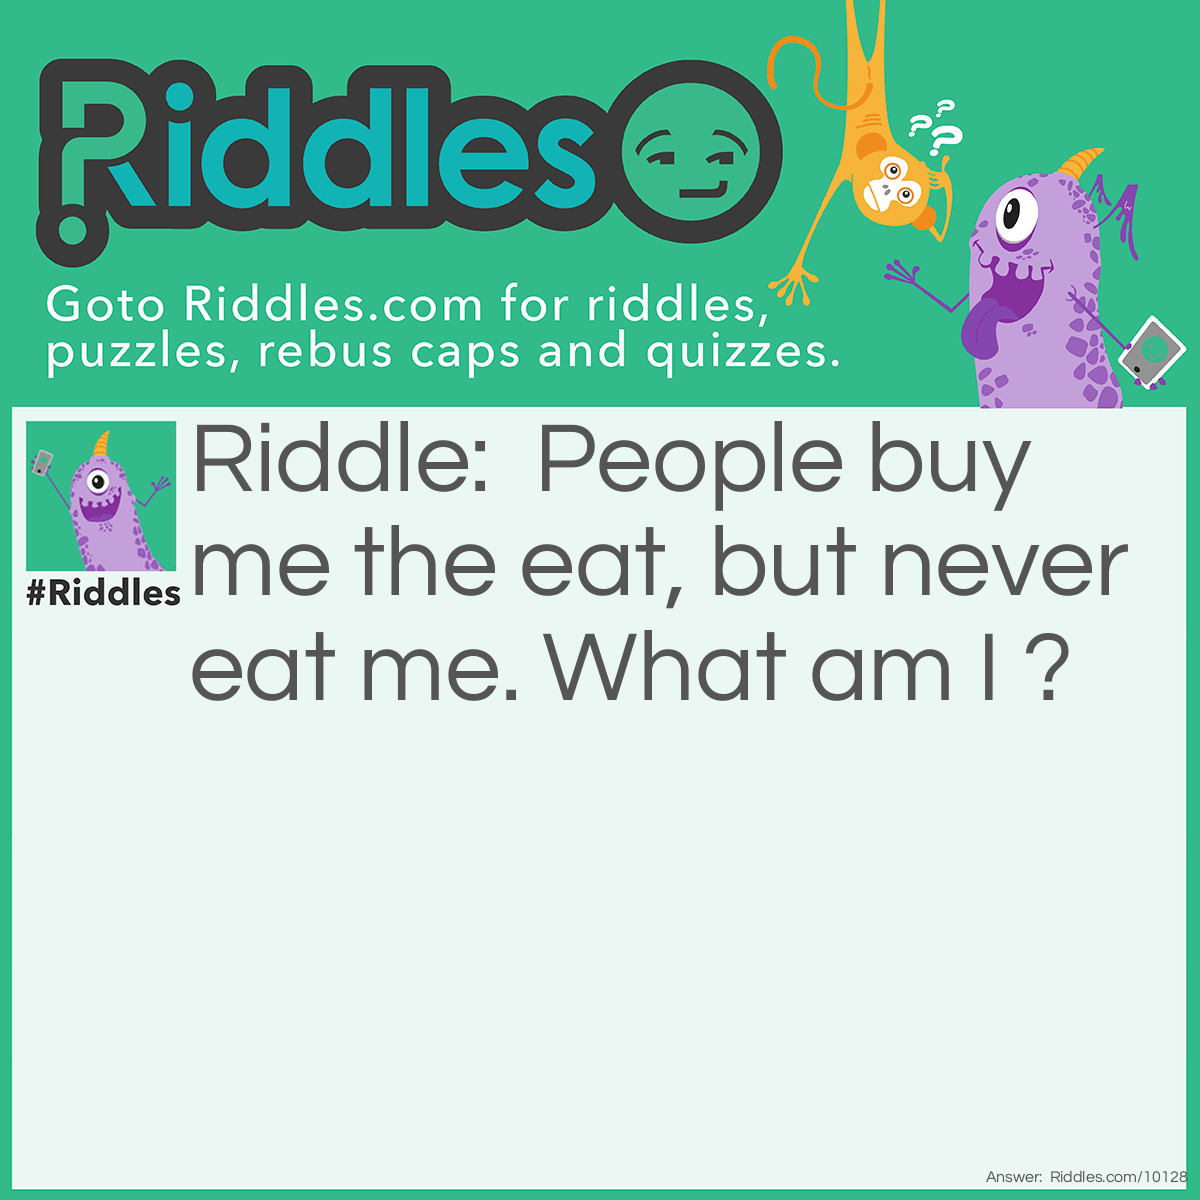 Riddle: People buy me the eat, but never eat me. What am I ? Answer: Cutlery.